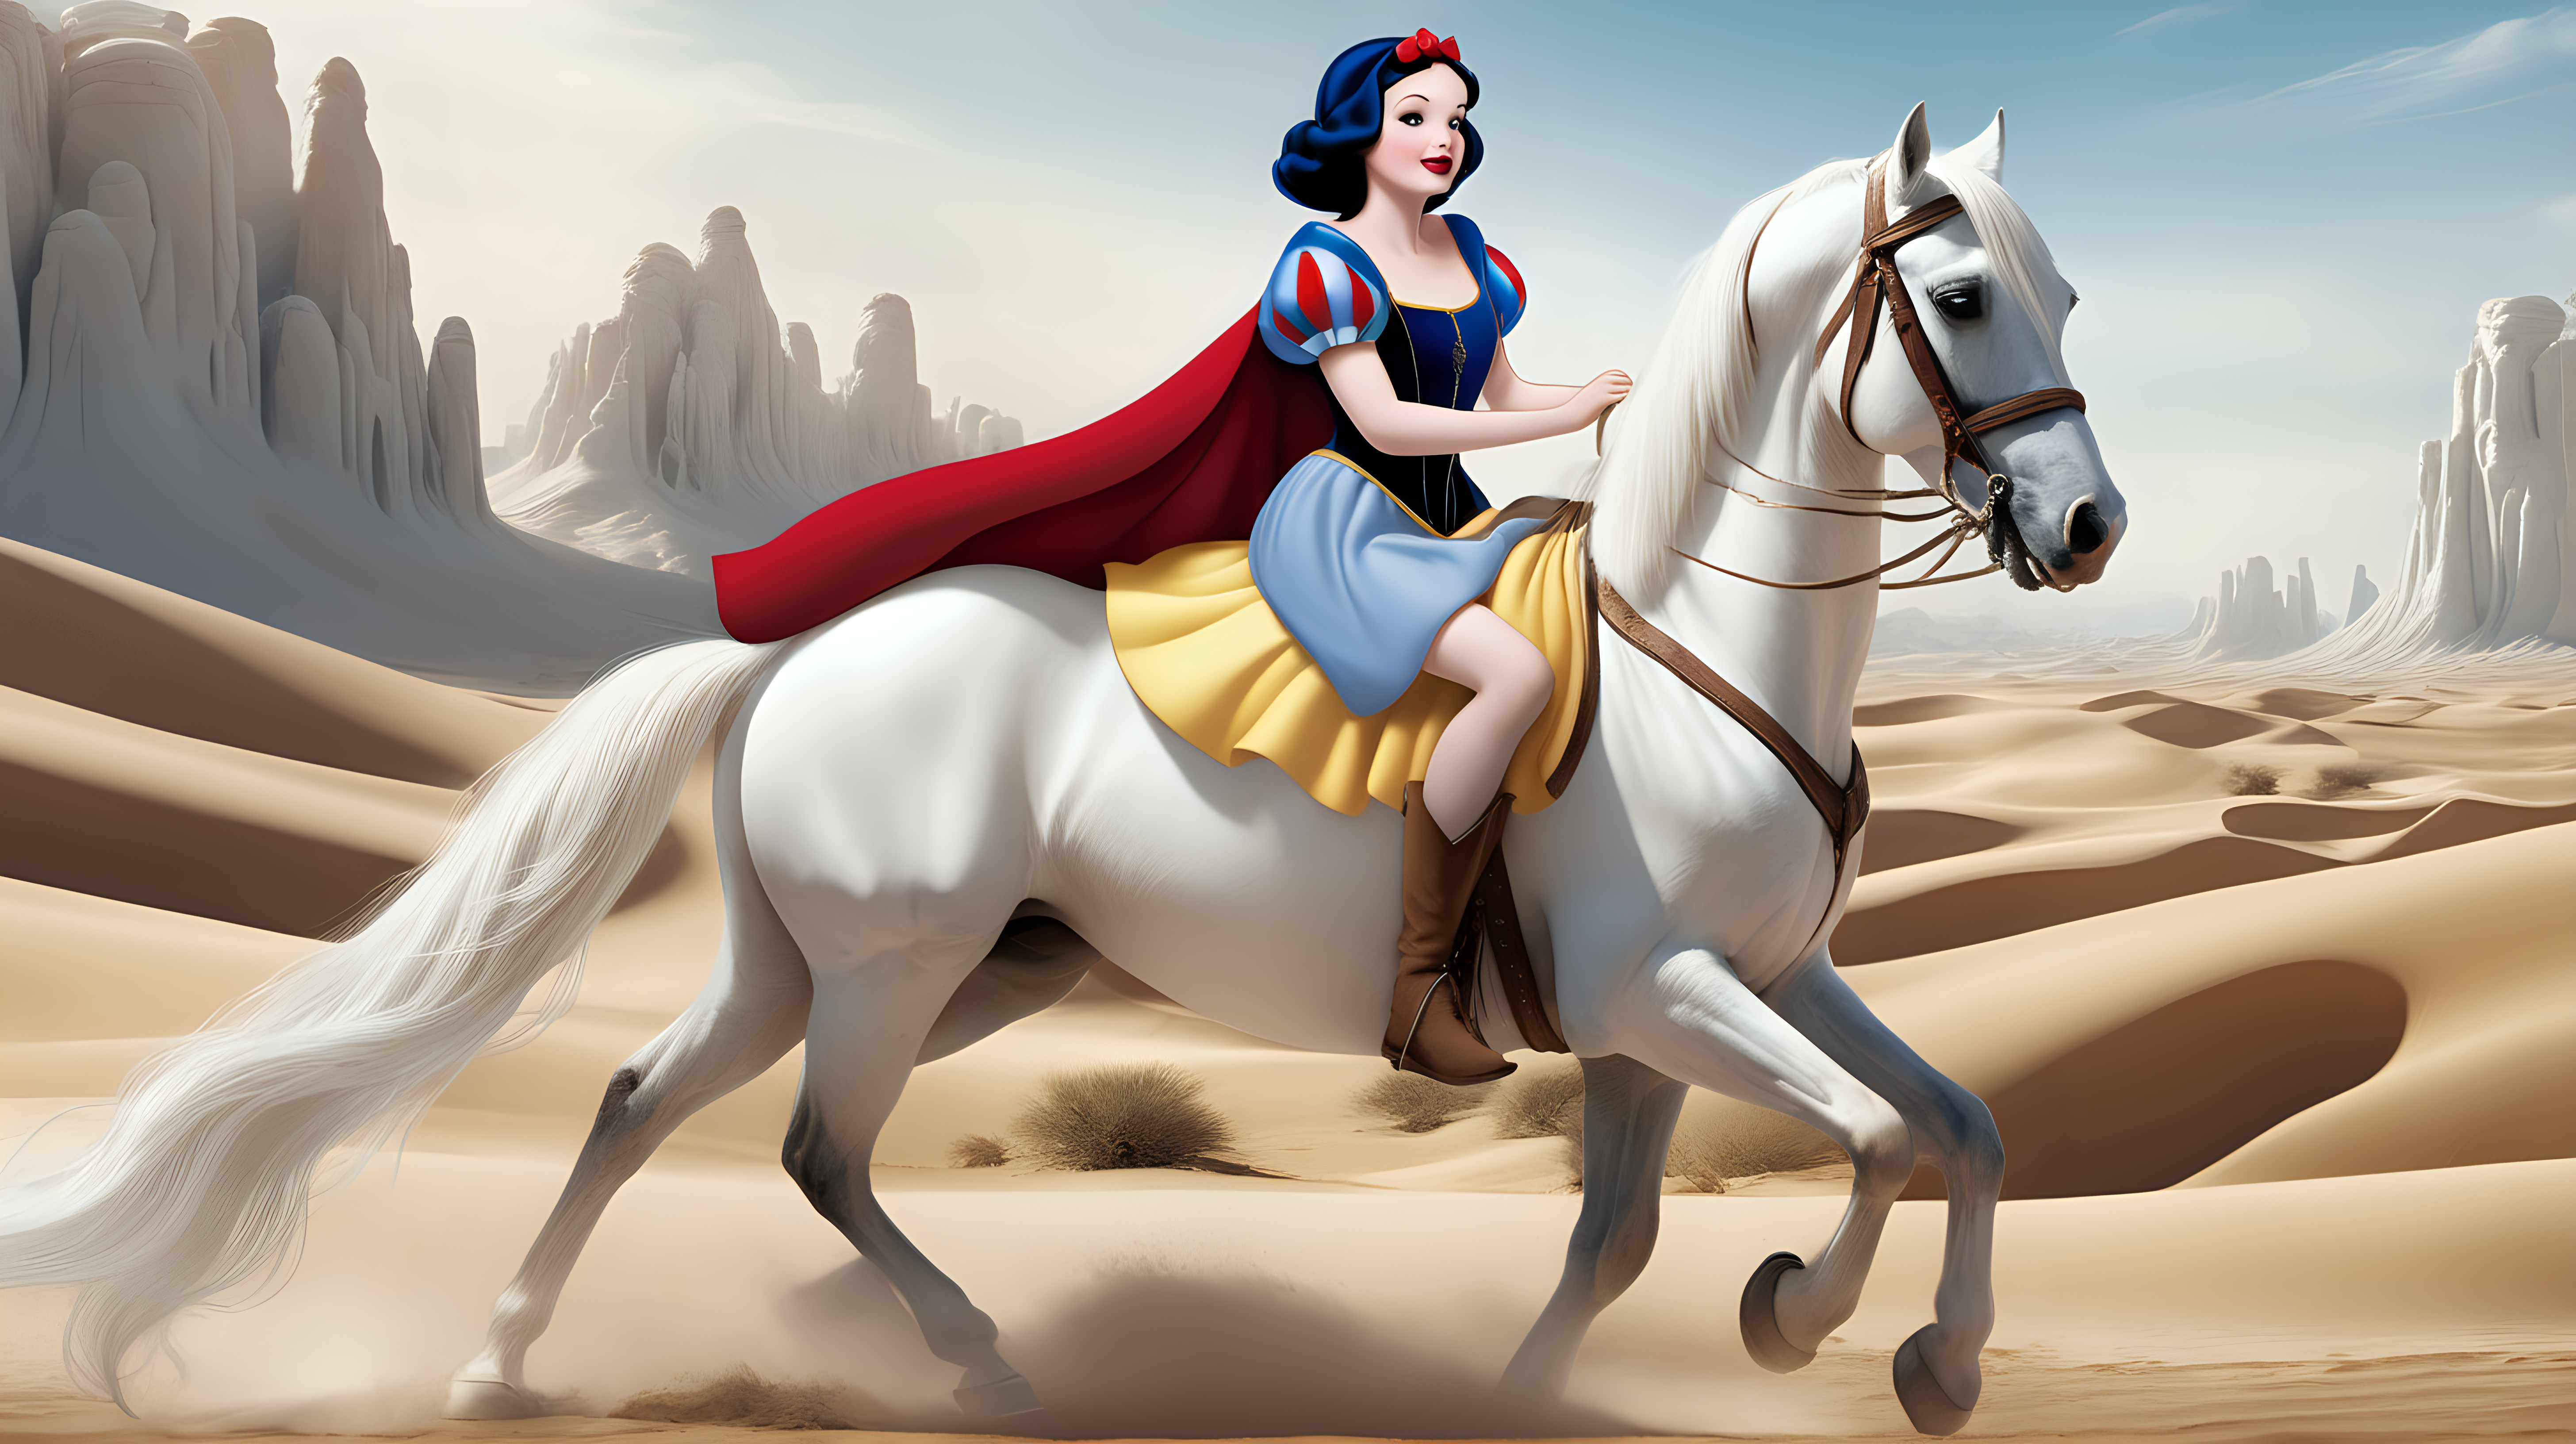 Snow White riding a white horse in the